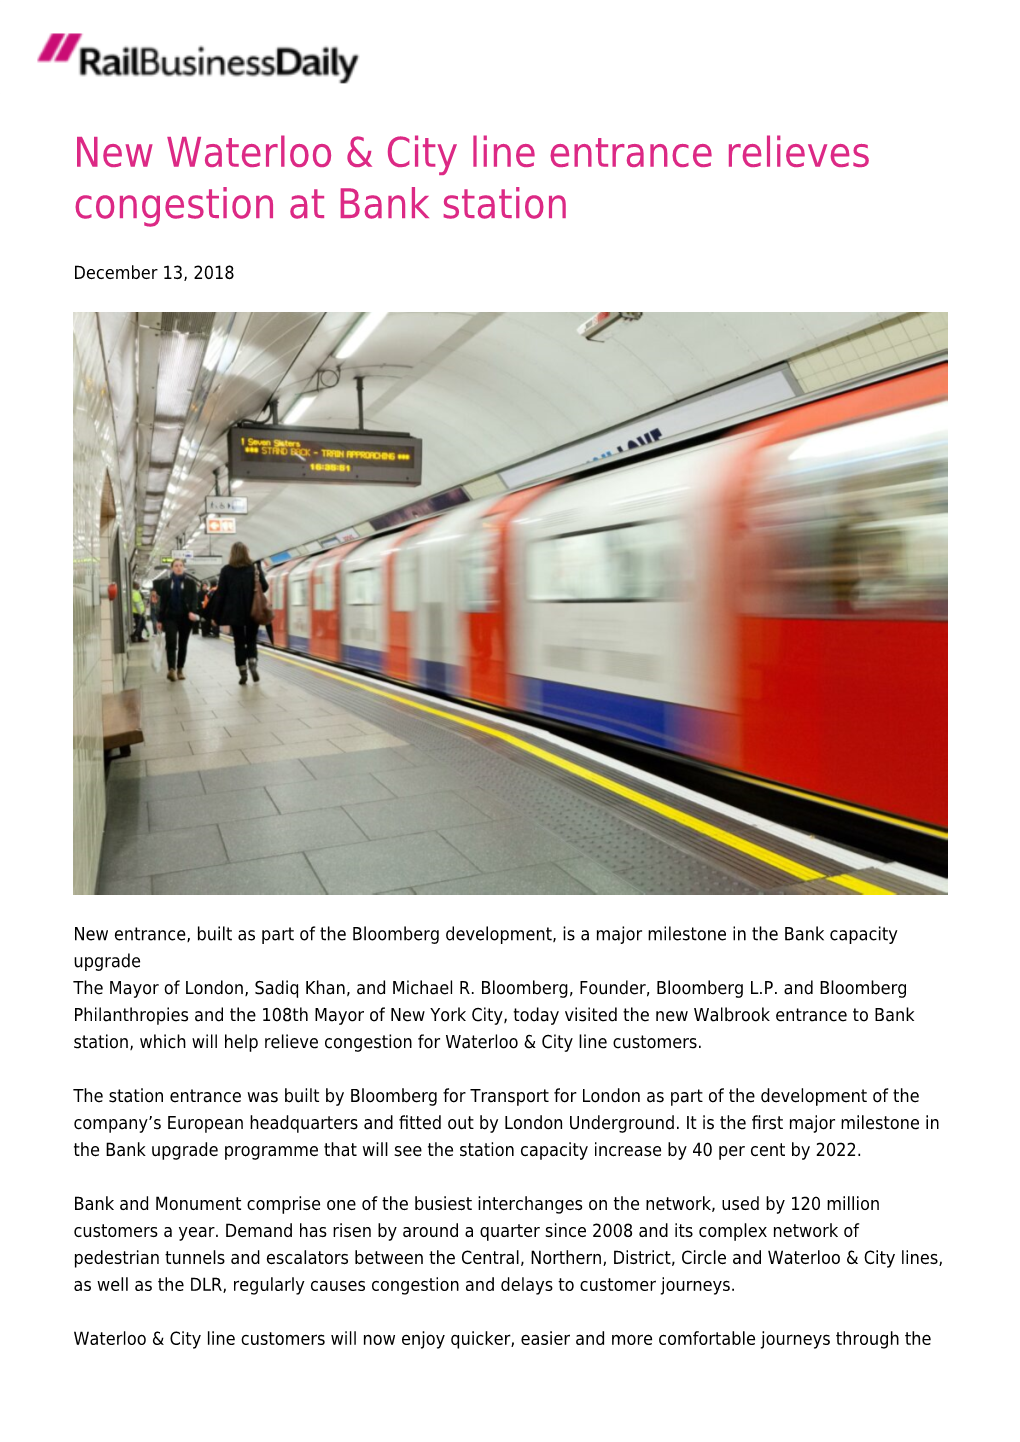 New Waterloo & City Line Entrance Relieves Congestion at Bank Station